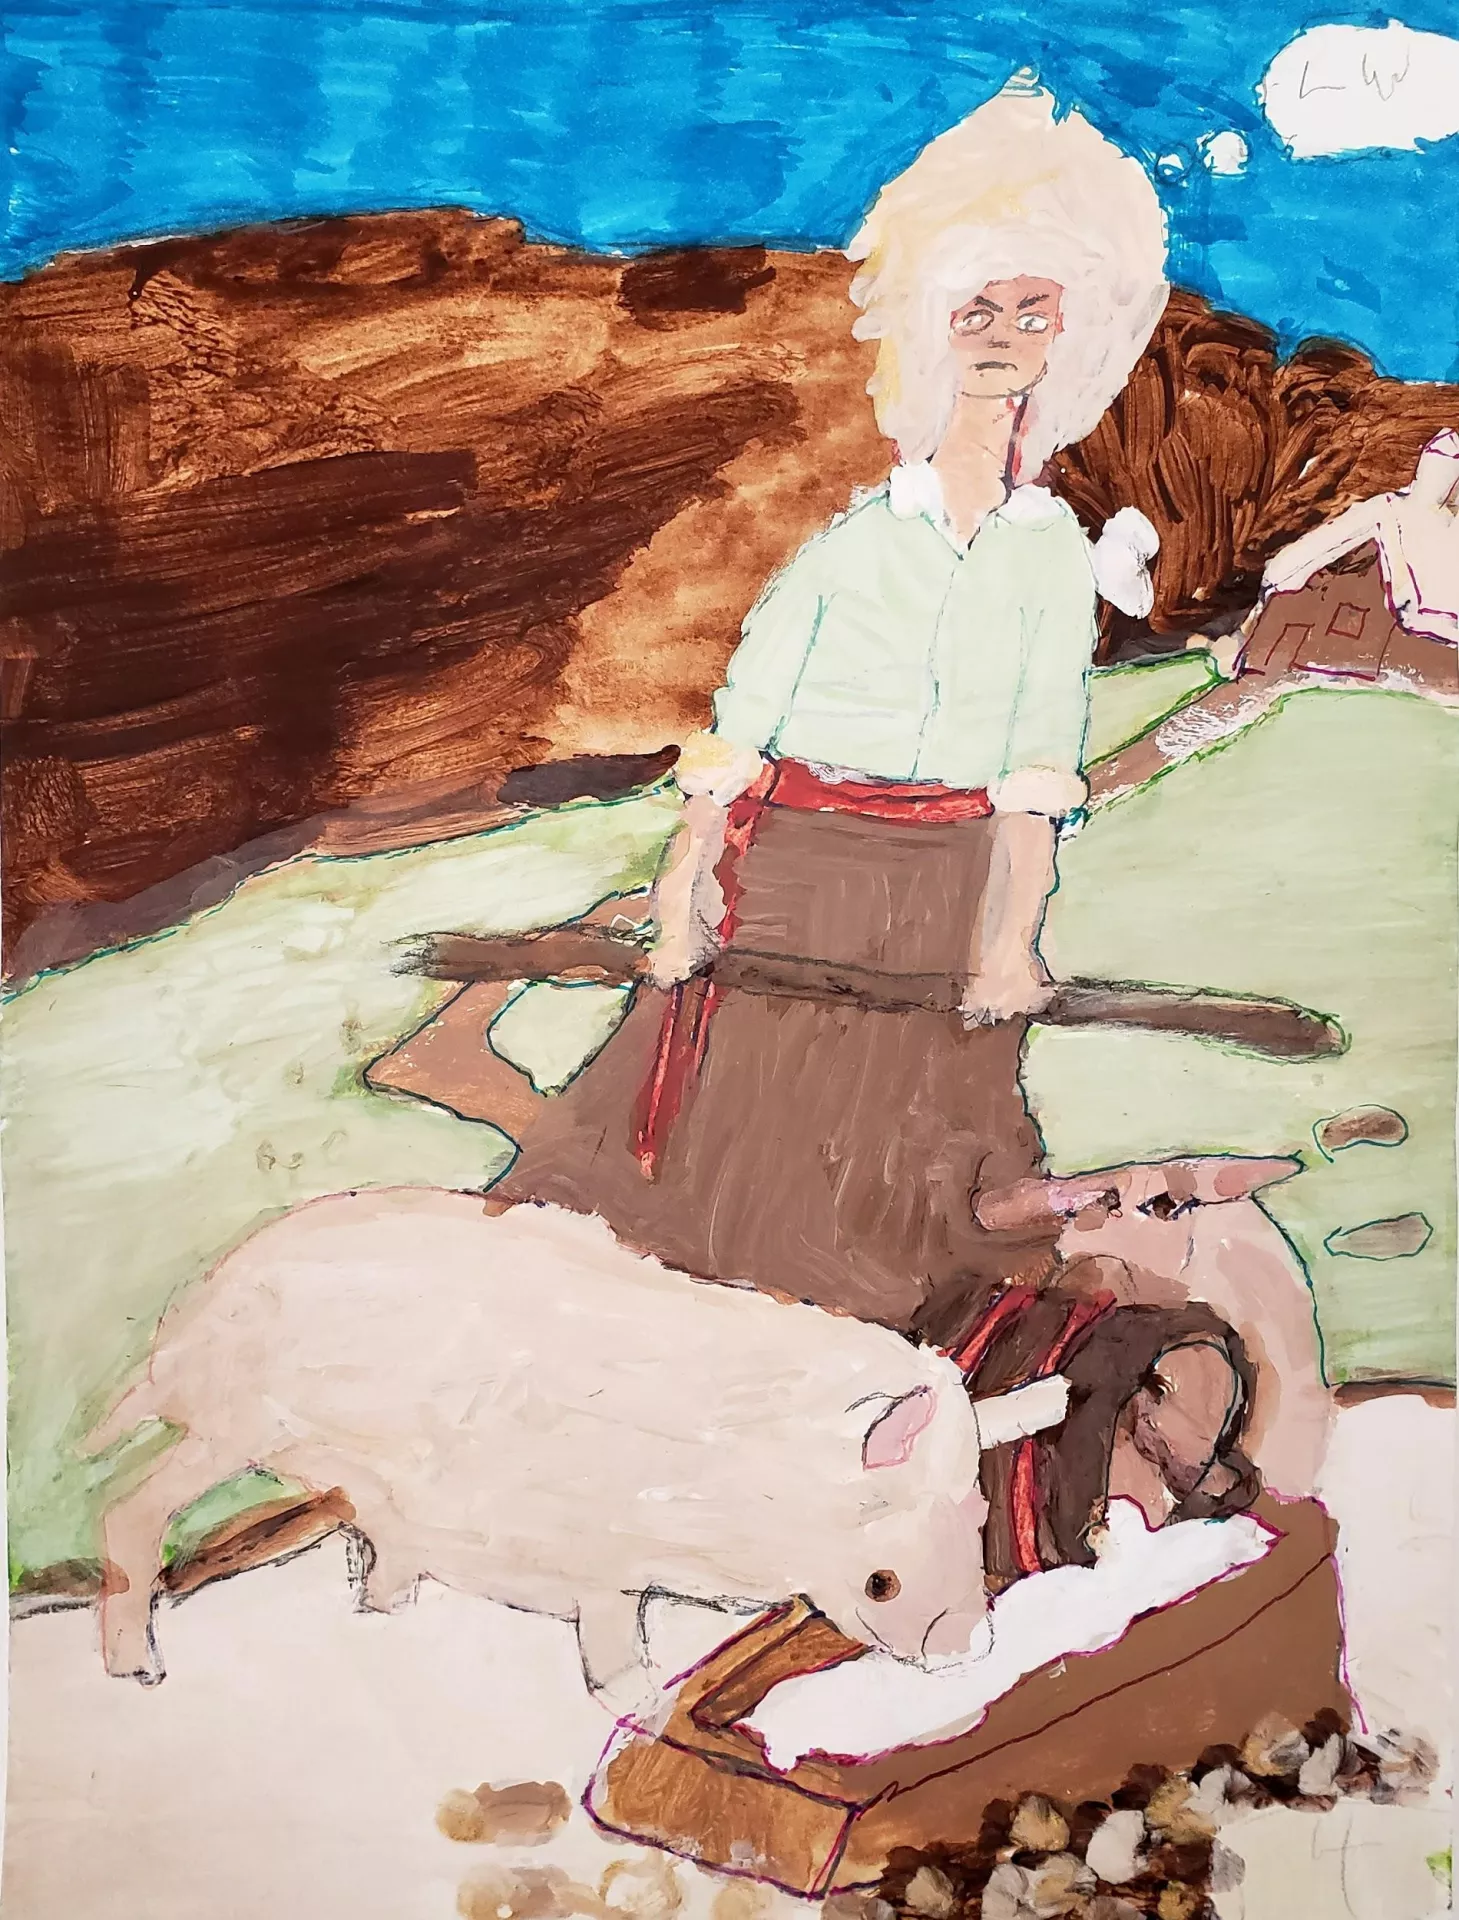 Terra uses fluid movement in her painting with the masterful use of contrasting accents.  This is an image of a woman feeding the pigs on her farm.  She is wearing a white blouse and a brown skirt.  The pig is eating from a trough.  This is an artwork from Her "Pig Book."